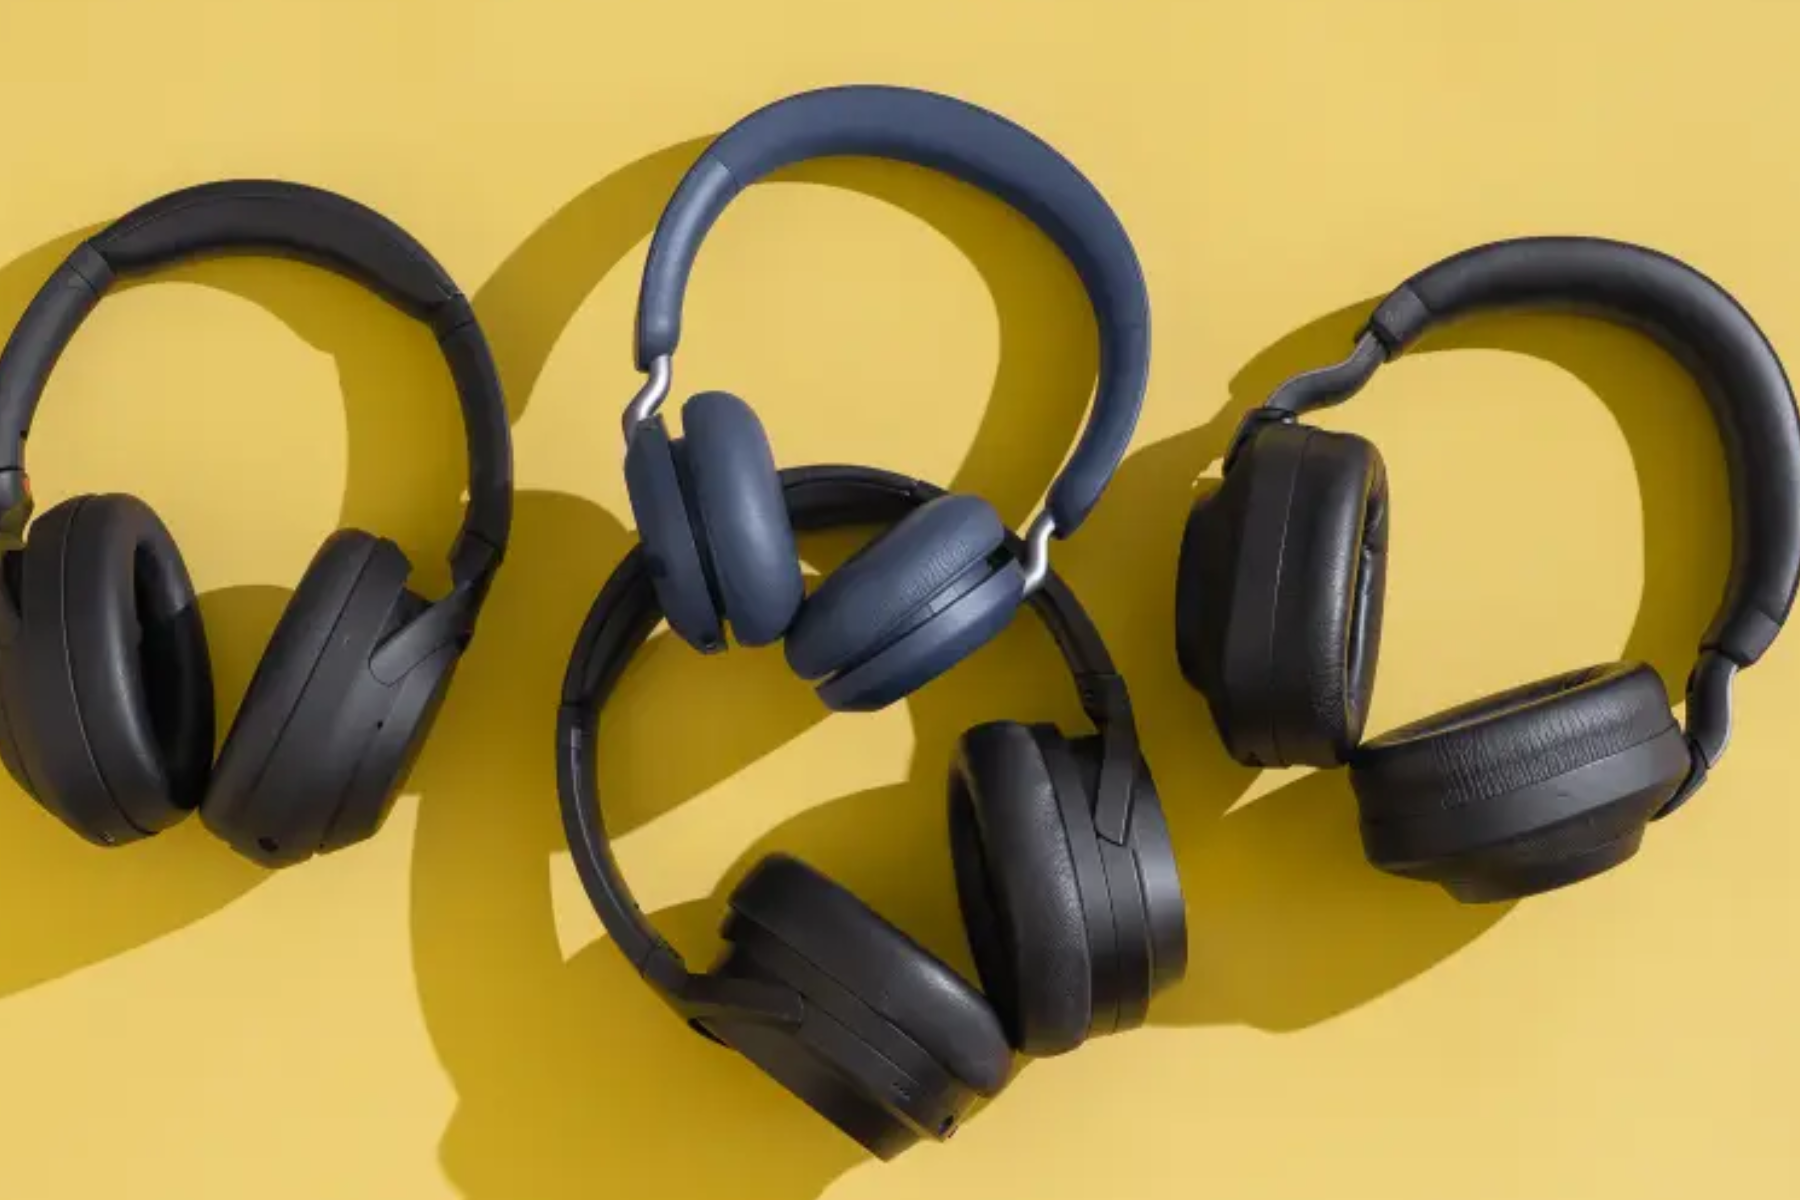 Four Bluetooth headphones on a yellow wall